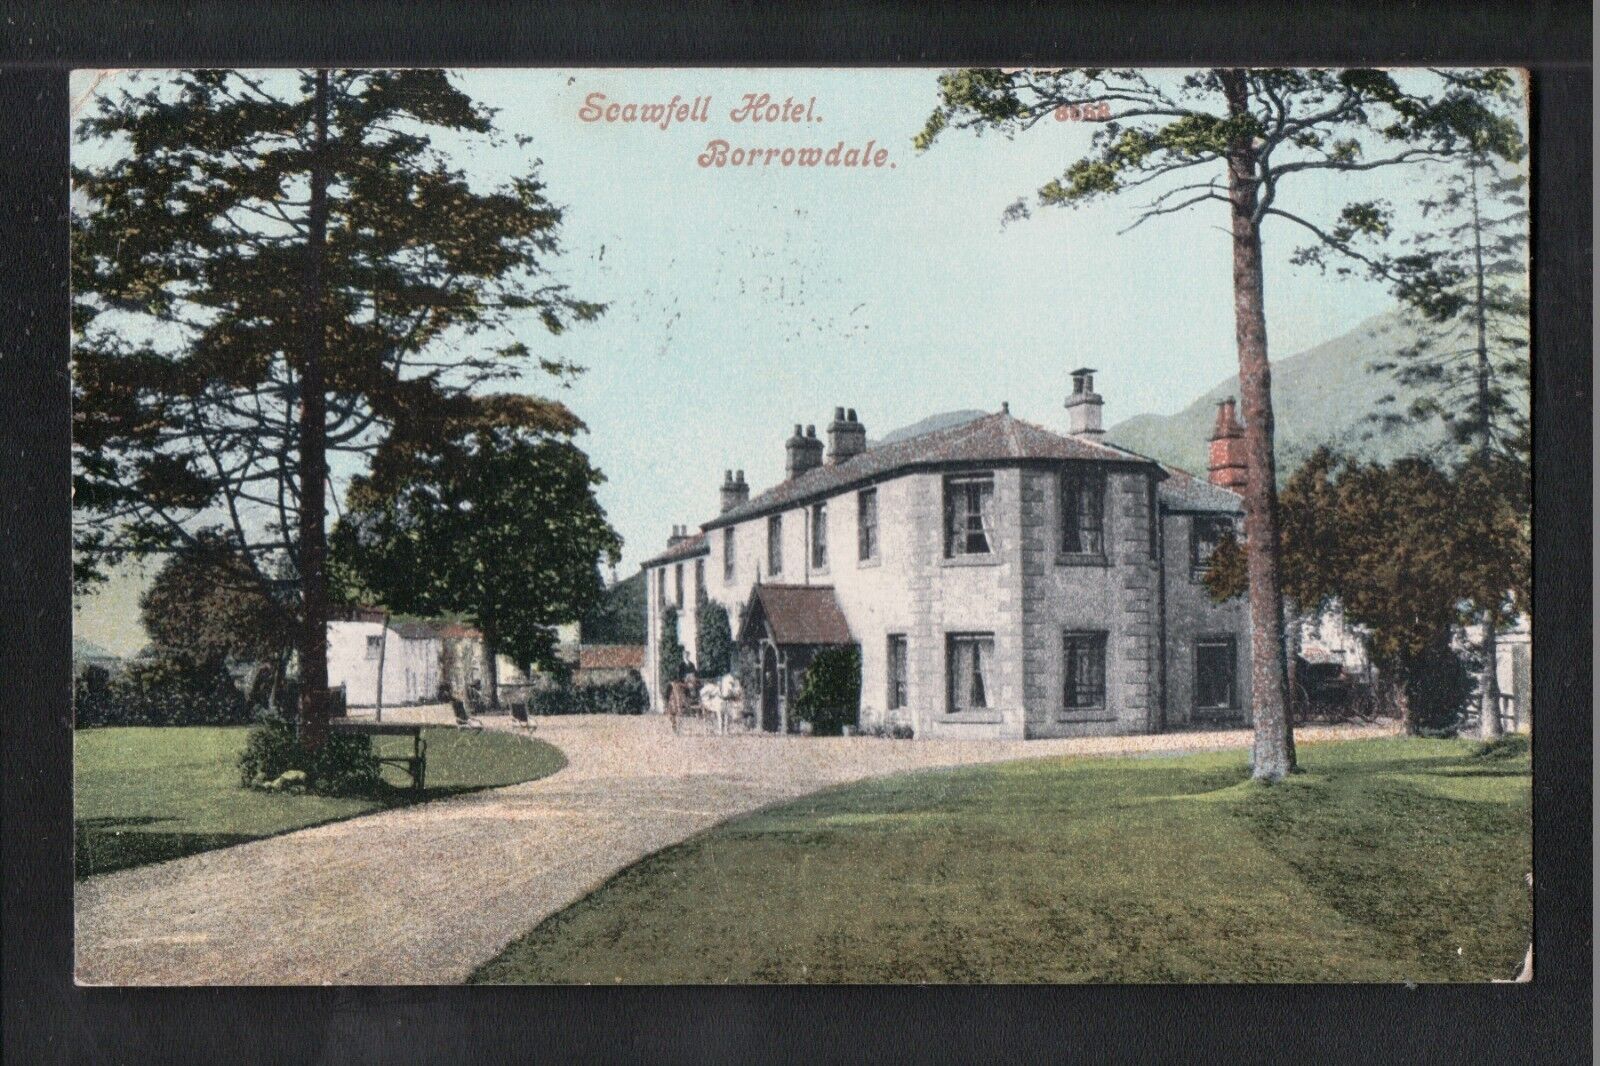 House Clearance - L@@K  Scawfell Hotel Borrowdale Cumbria 1908 Service ~ LOVELY SHADES